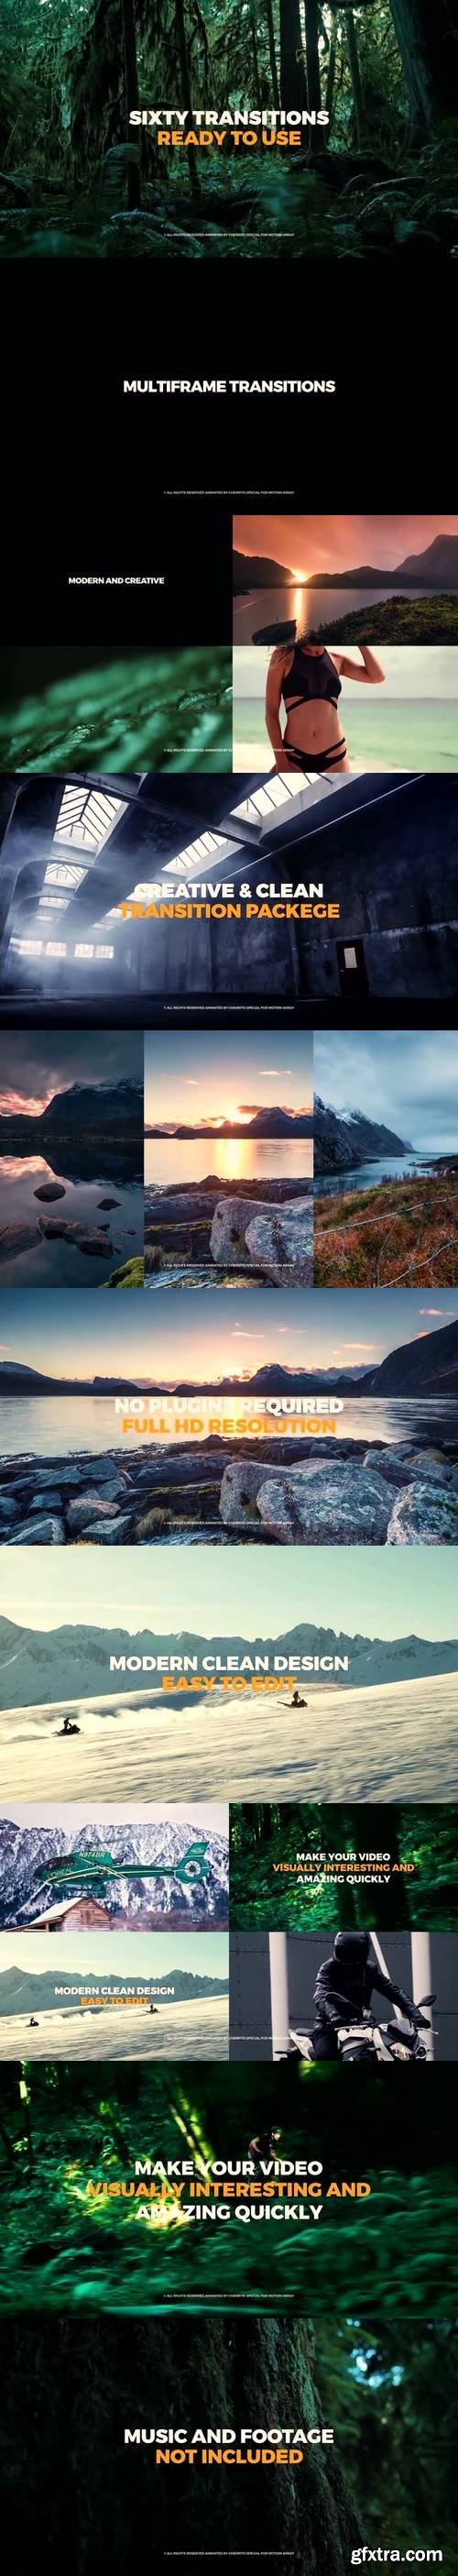 MA - Multiframe Transitions Premiere Pro Templates 57374